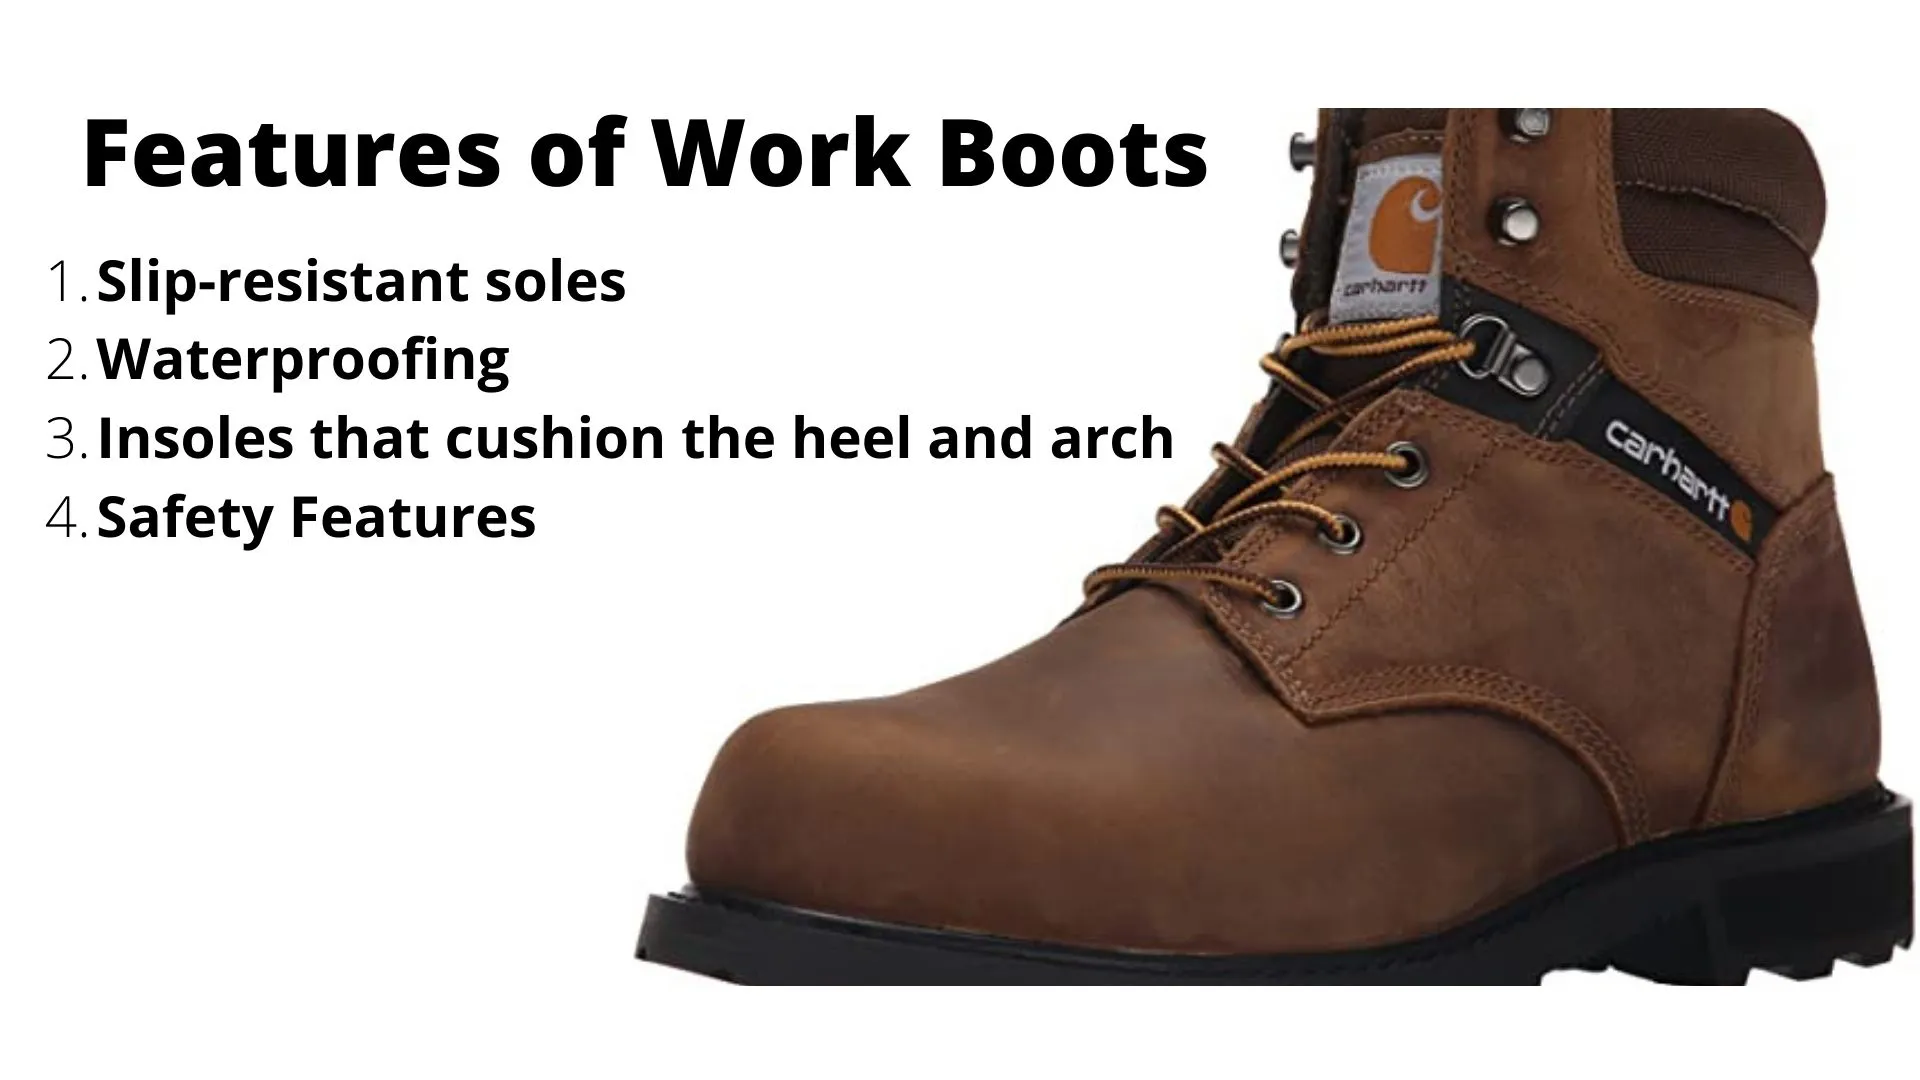 Features of work boots